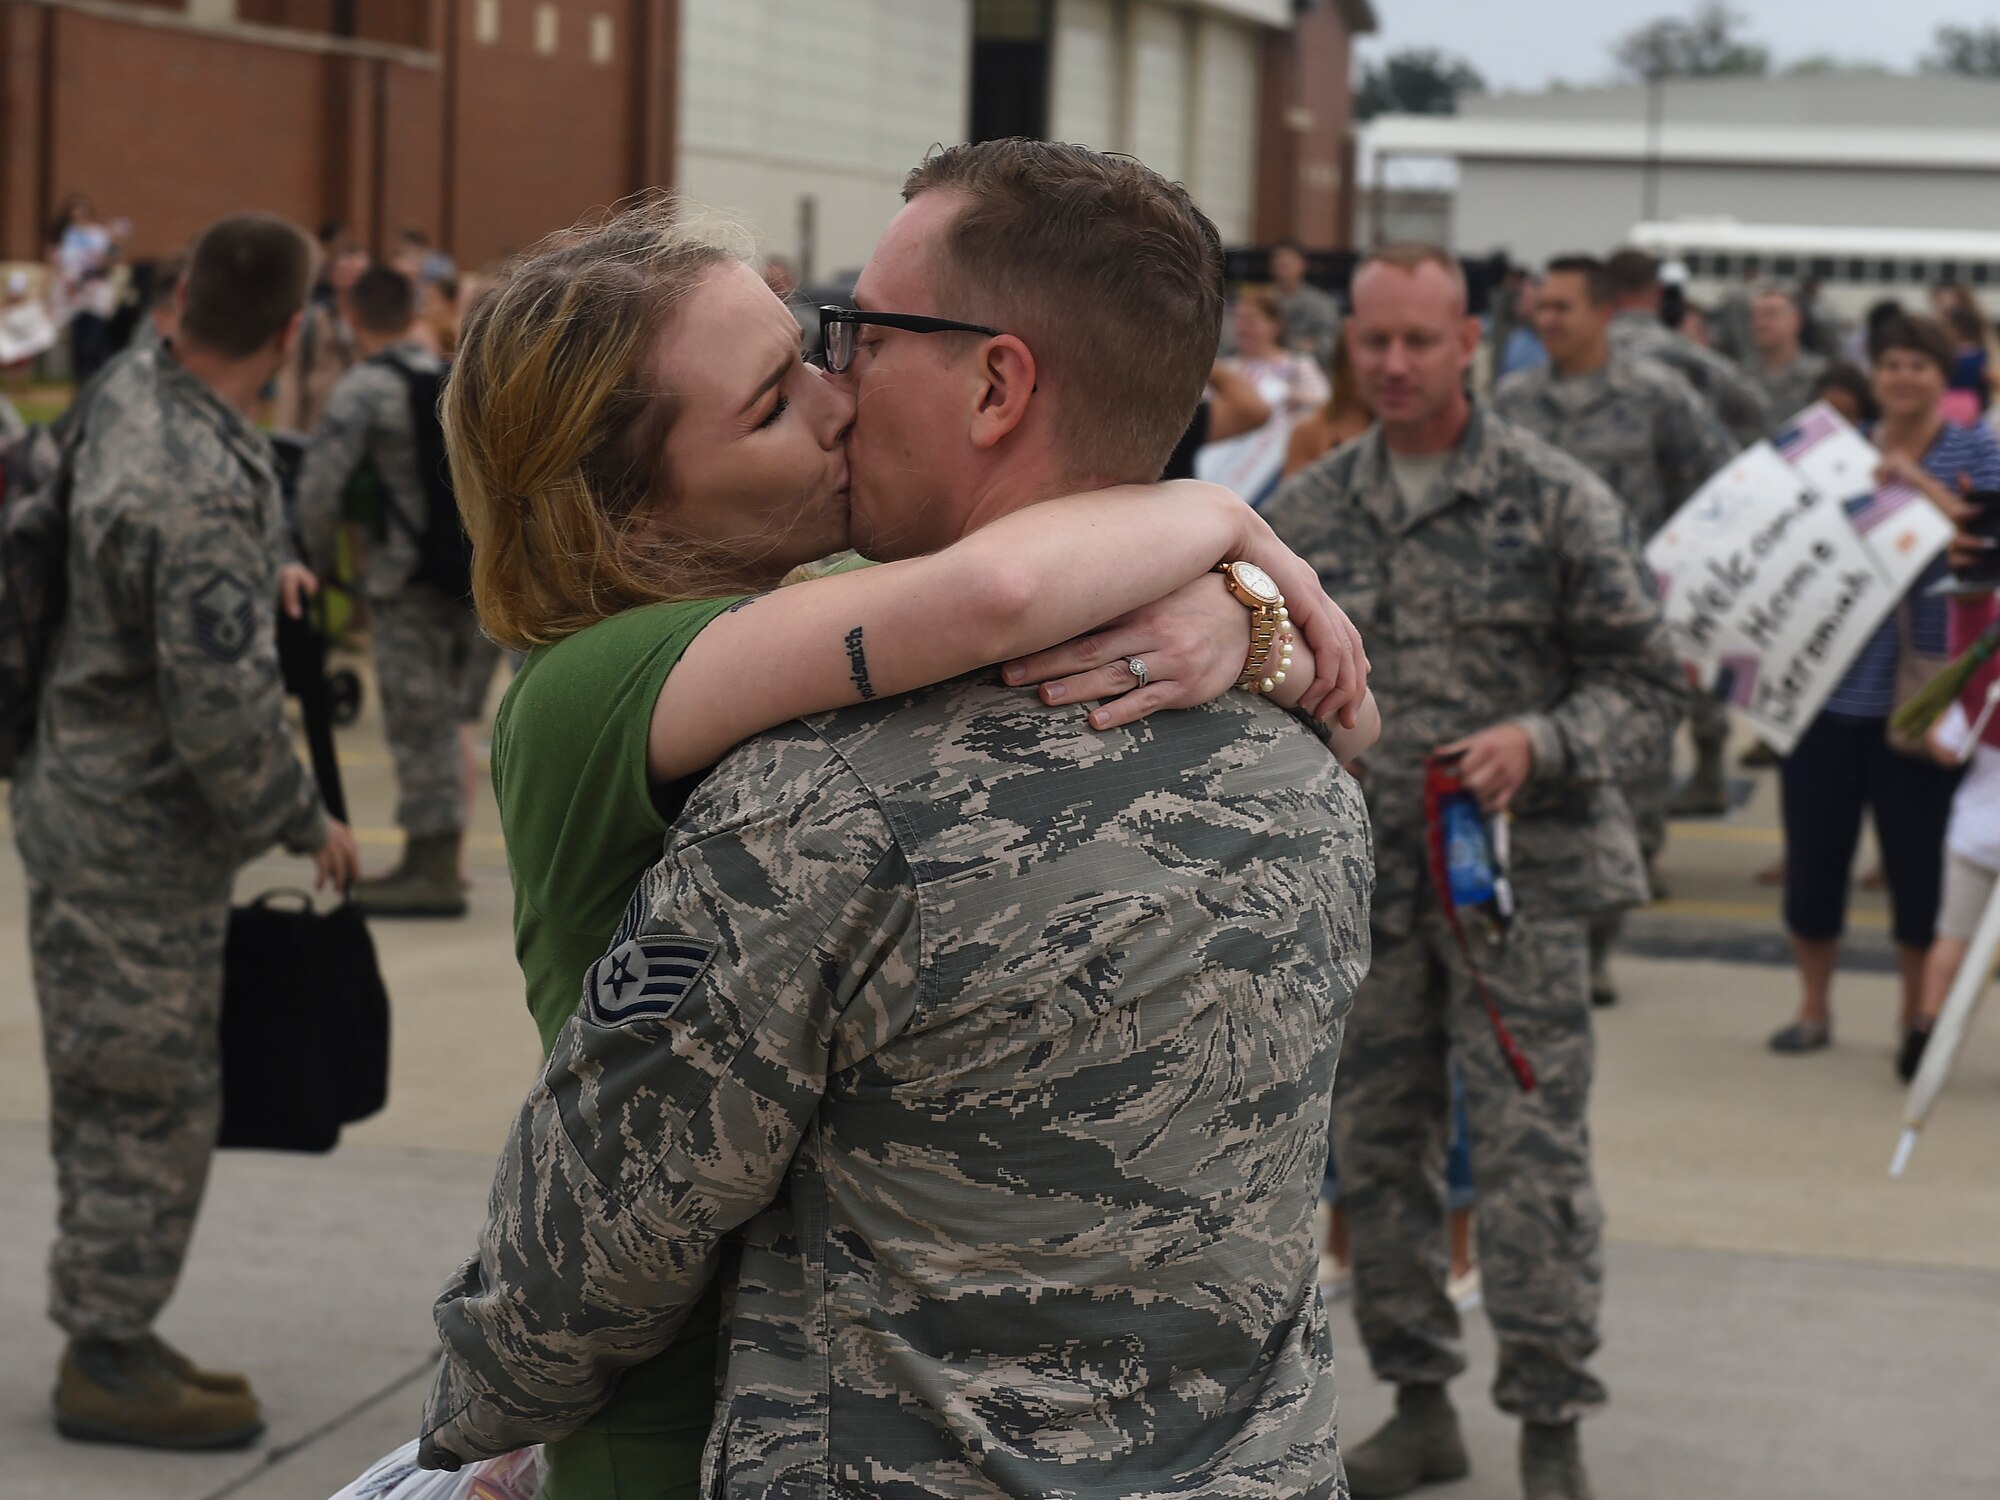 U.S. Air Force Staff Sgt. Nathaniel Sorensen, 633rd Communications Squadron client systems supervisor, kisses his wife Sarah Sorensen, at Joint Base Langley-Eustis, Va., Oct. 12, 2017.